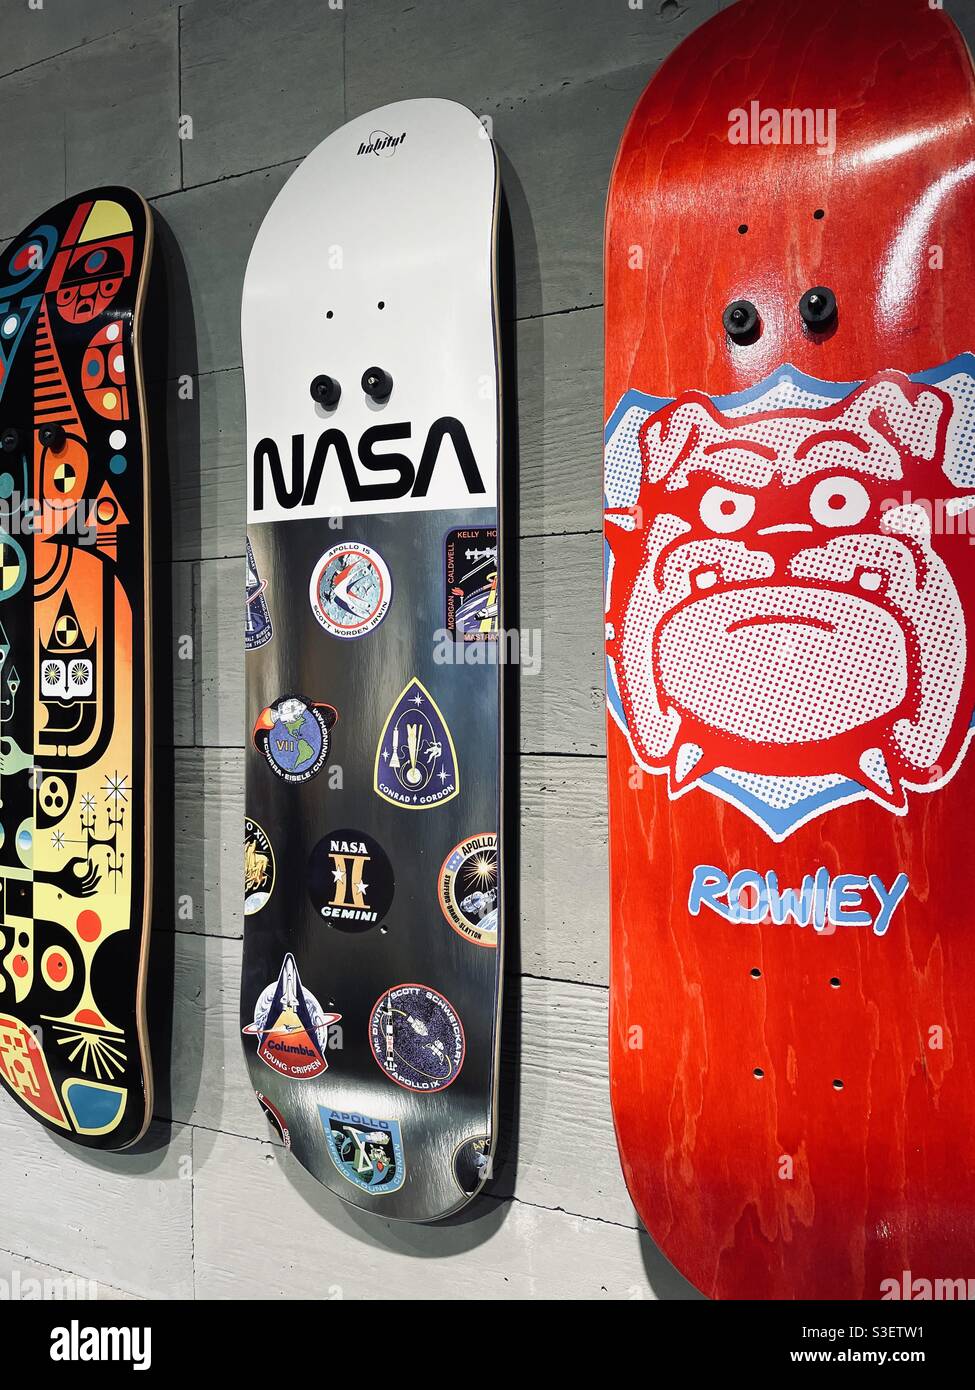 Skateboards on display at vans off-the-wall store, 5th Avenue, NYC, USA  Stock Photo - Alamy